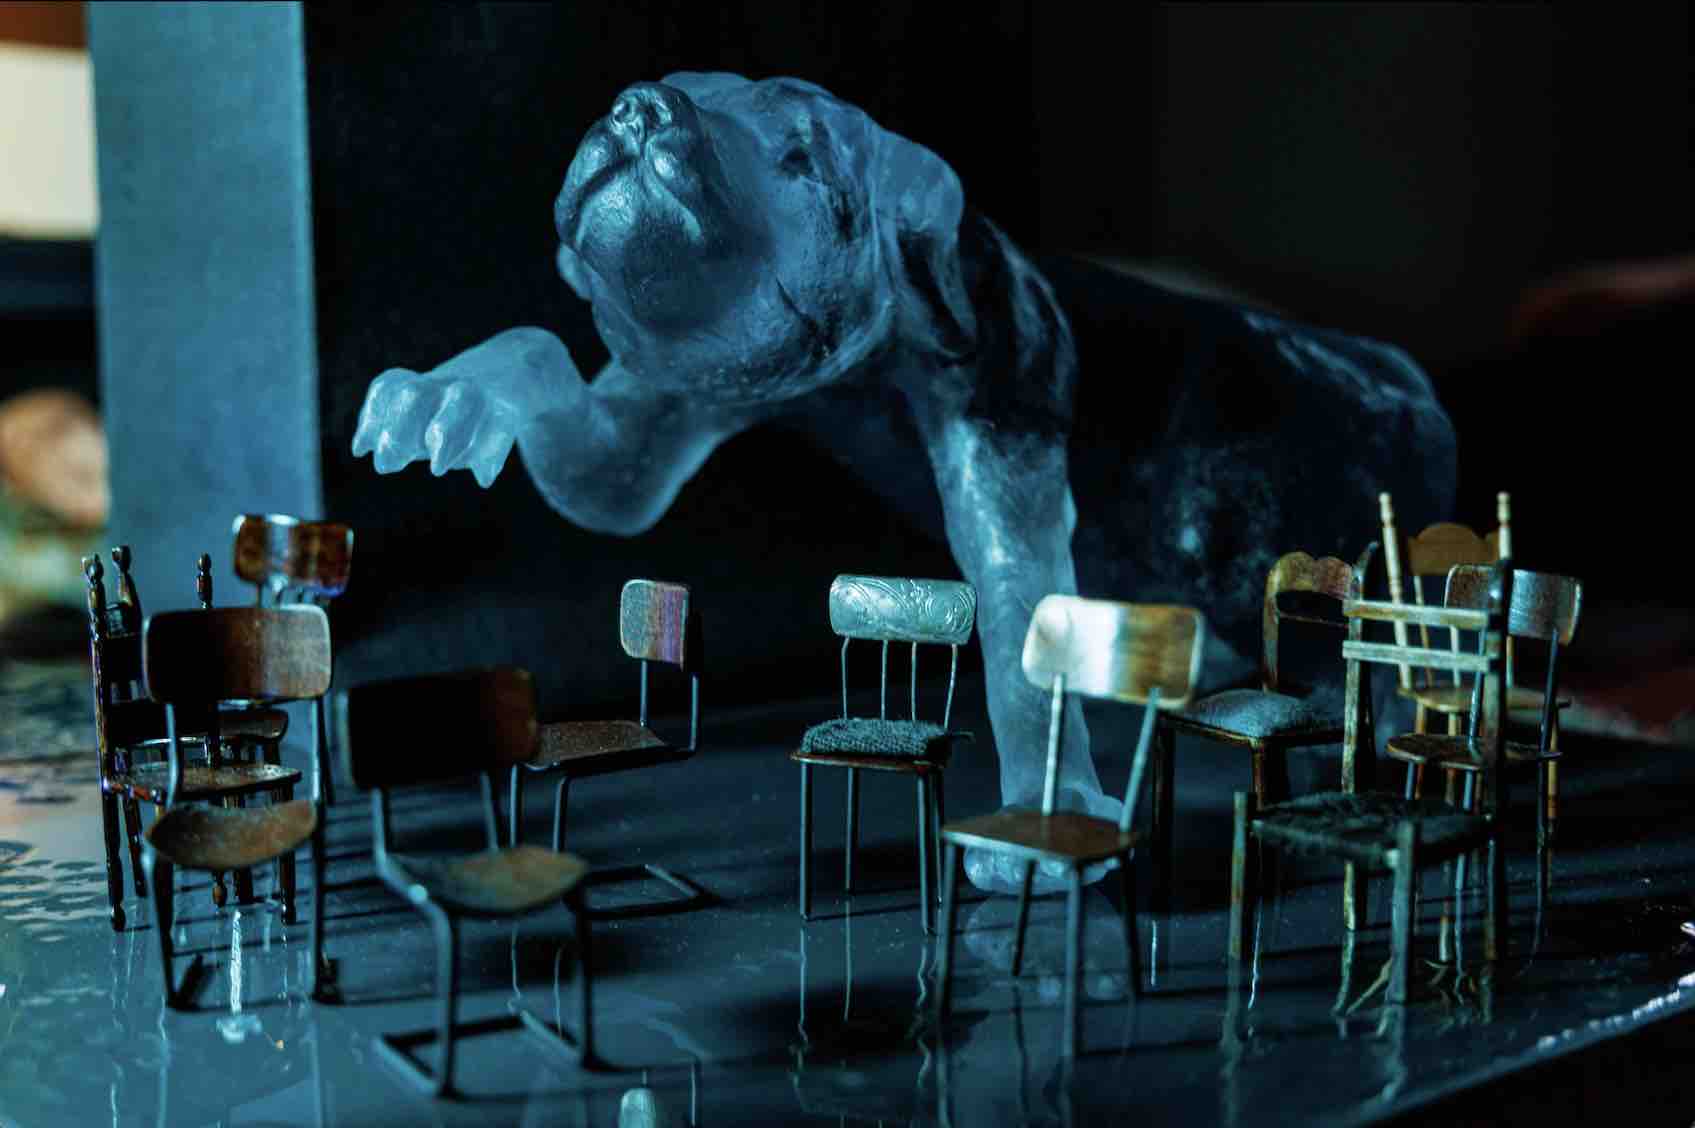 A large blue cast glass dog reaches a paw tentatively over a theatre of small empty chairs. Each chair is about the size of his paw, and woodworked in a different style. The lighting is eery, dim and green-blue, causing the chairs to cast interesting shadows.